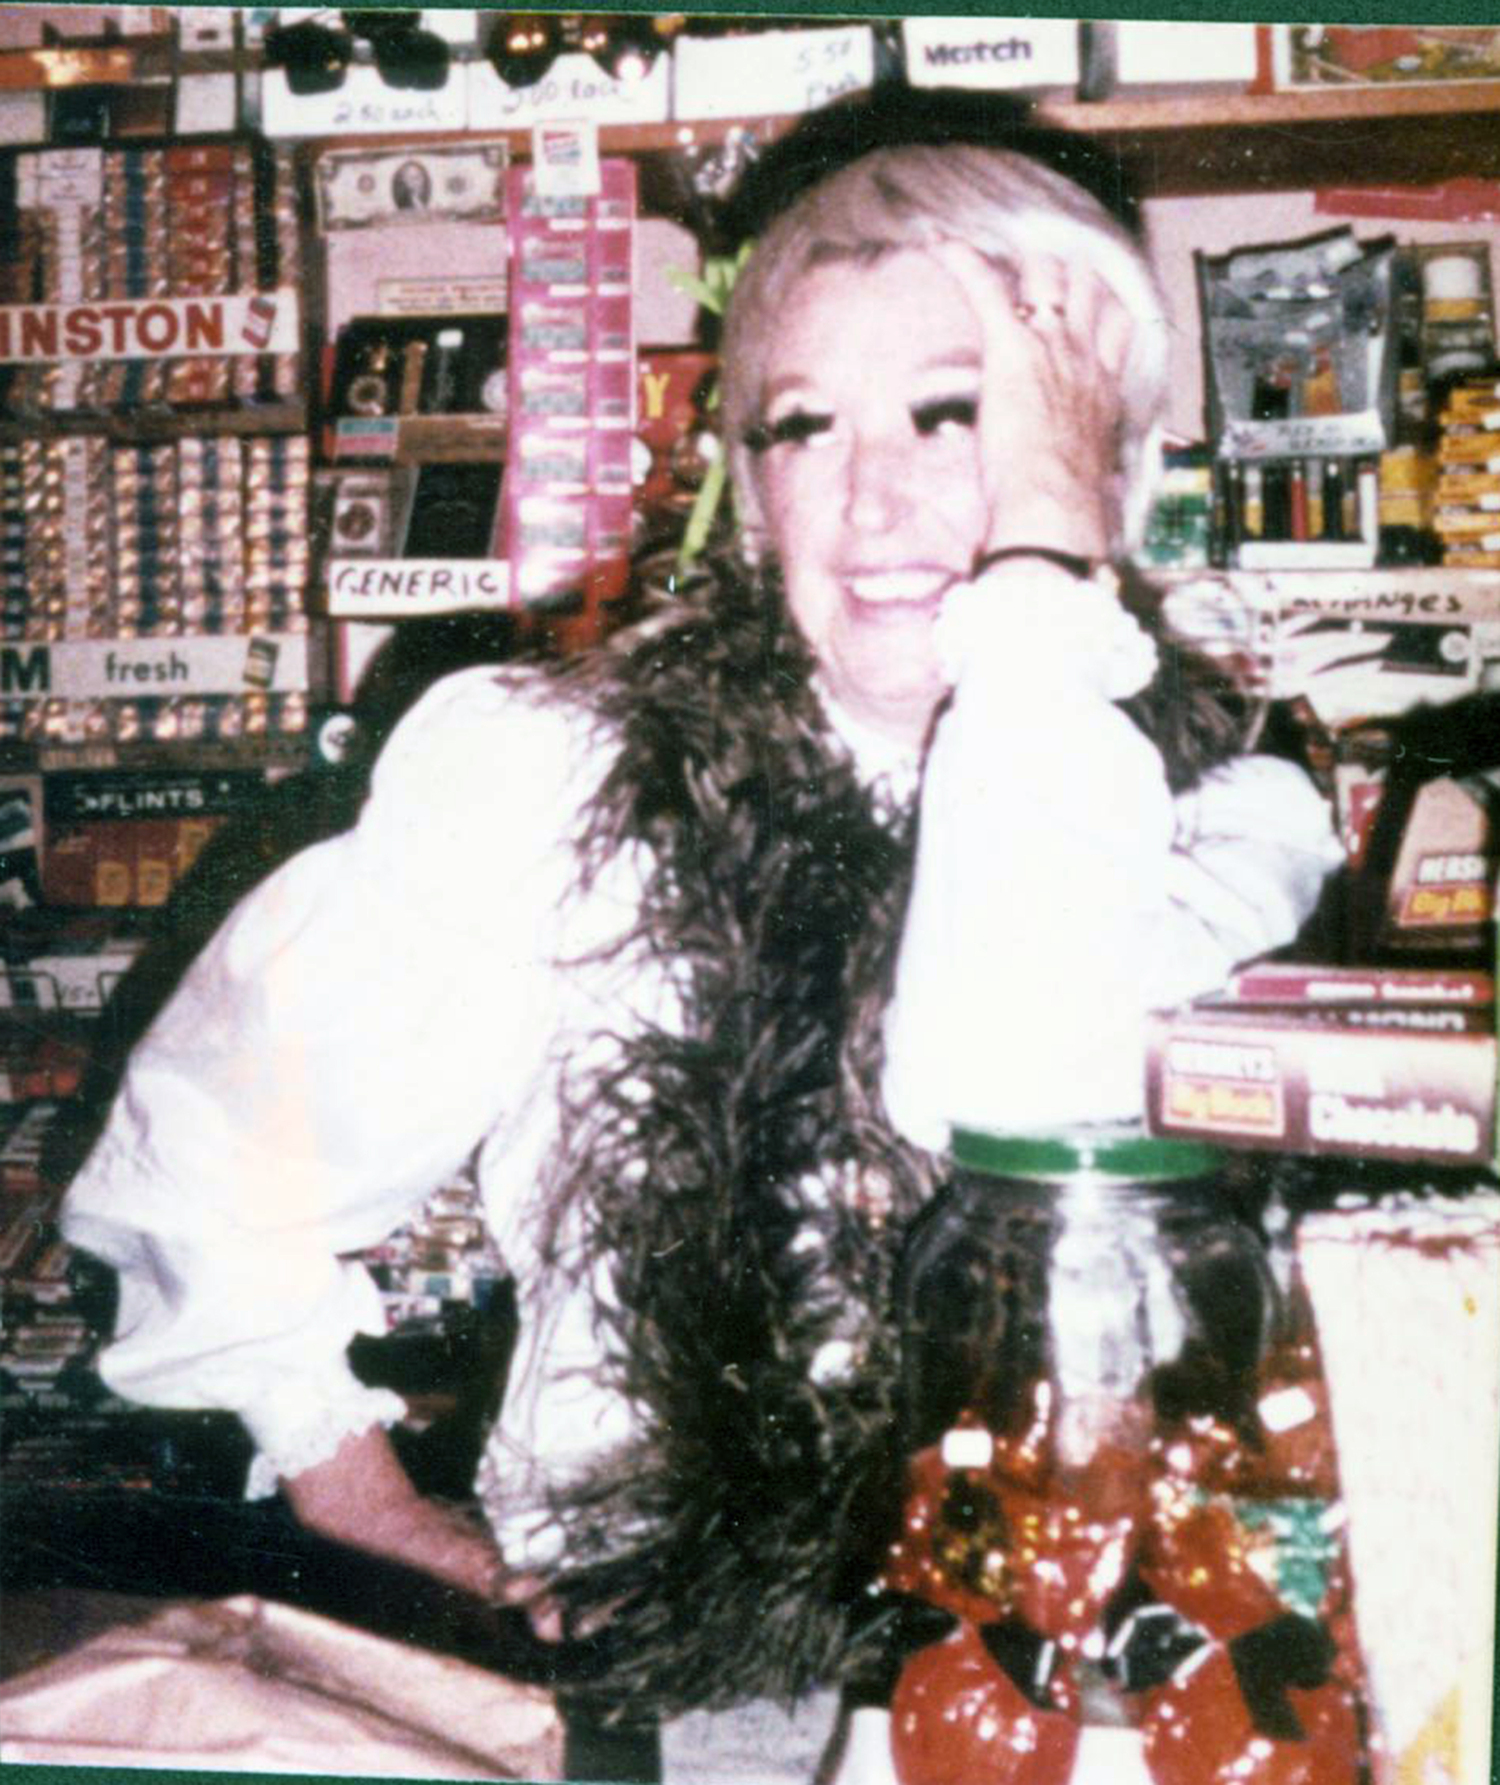 June Morris dressed for Halloween at the store in October 1984.